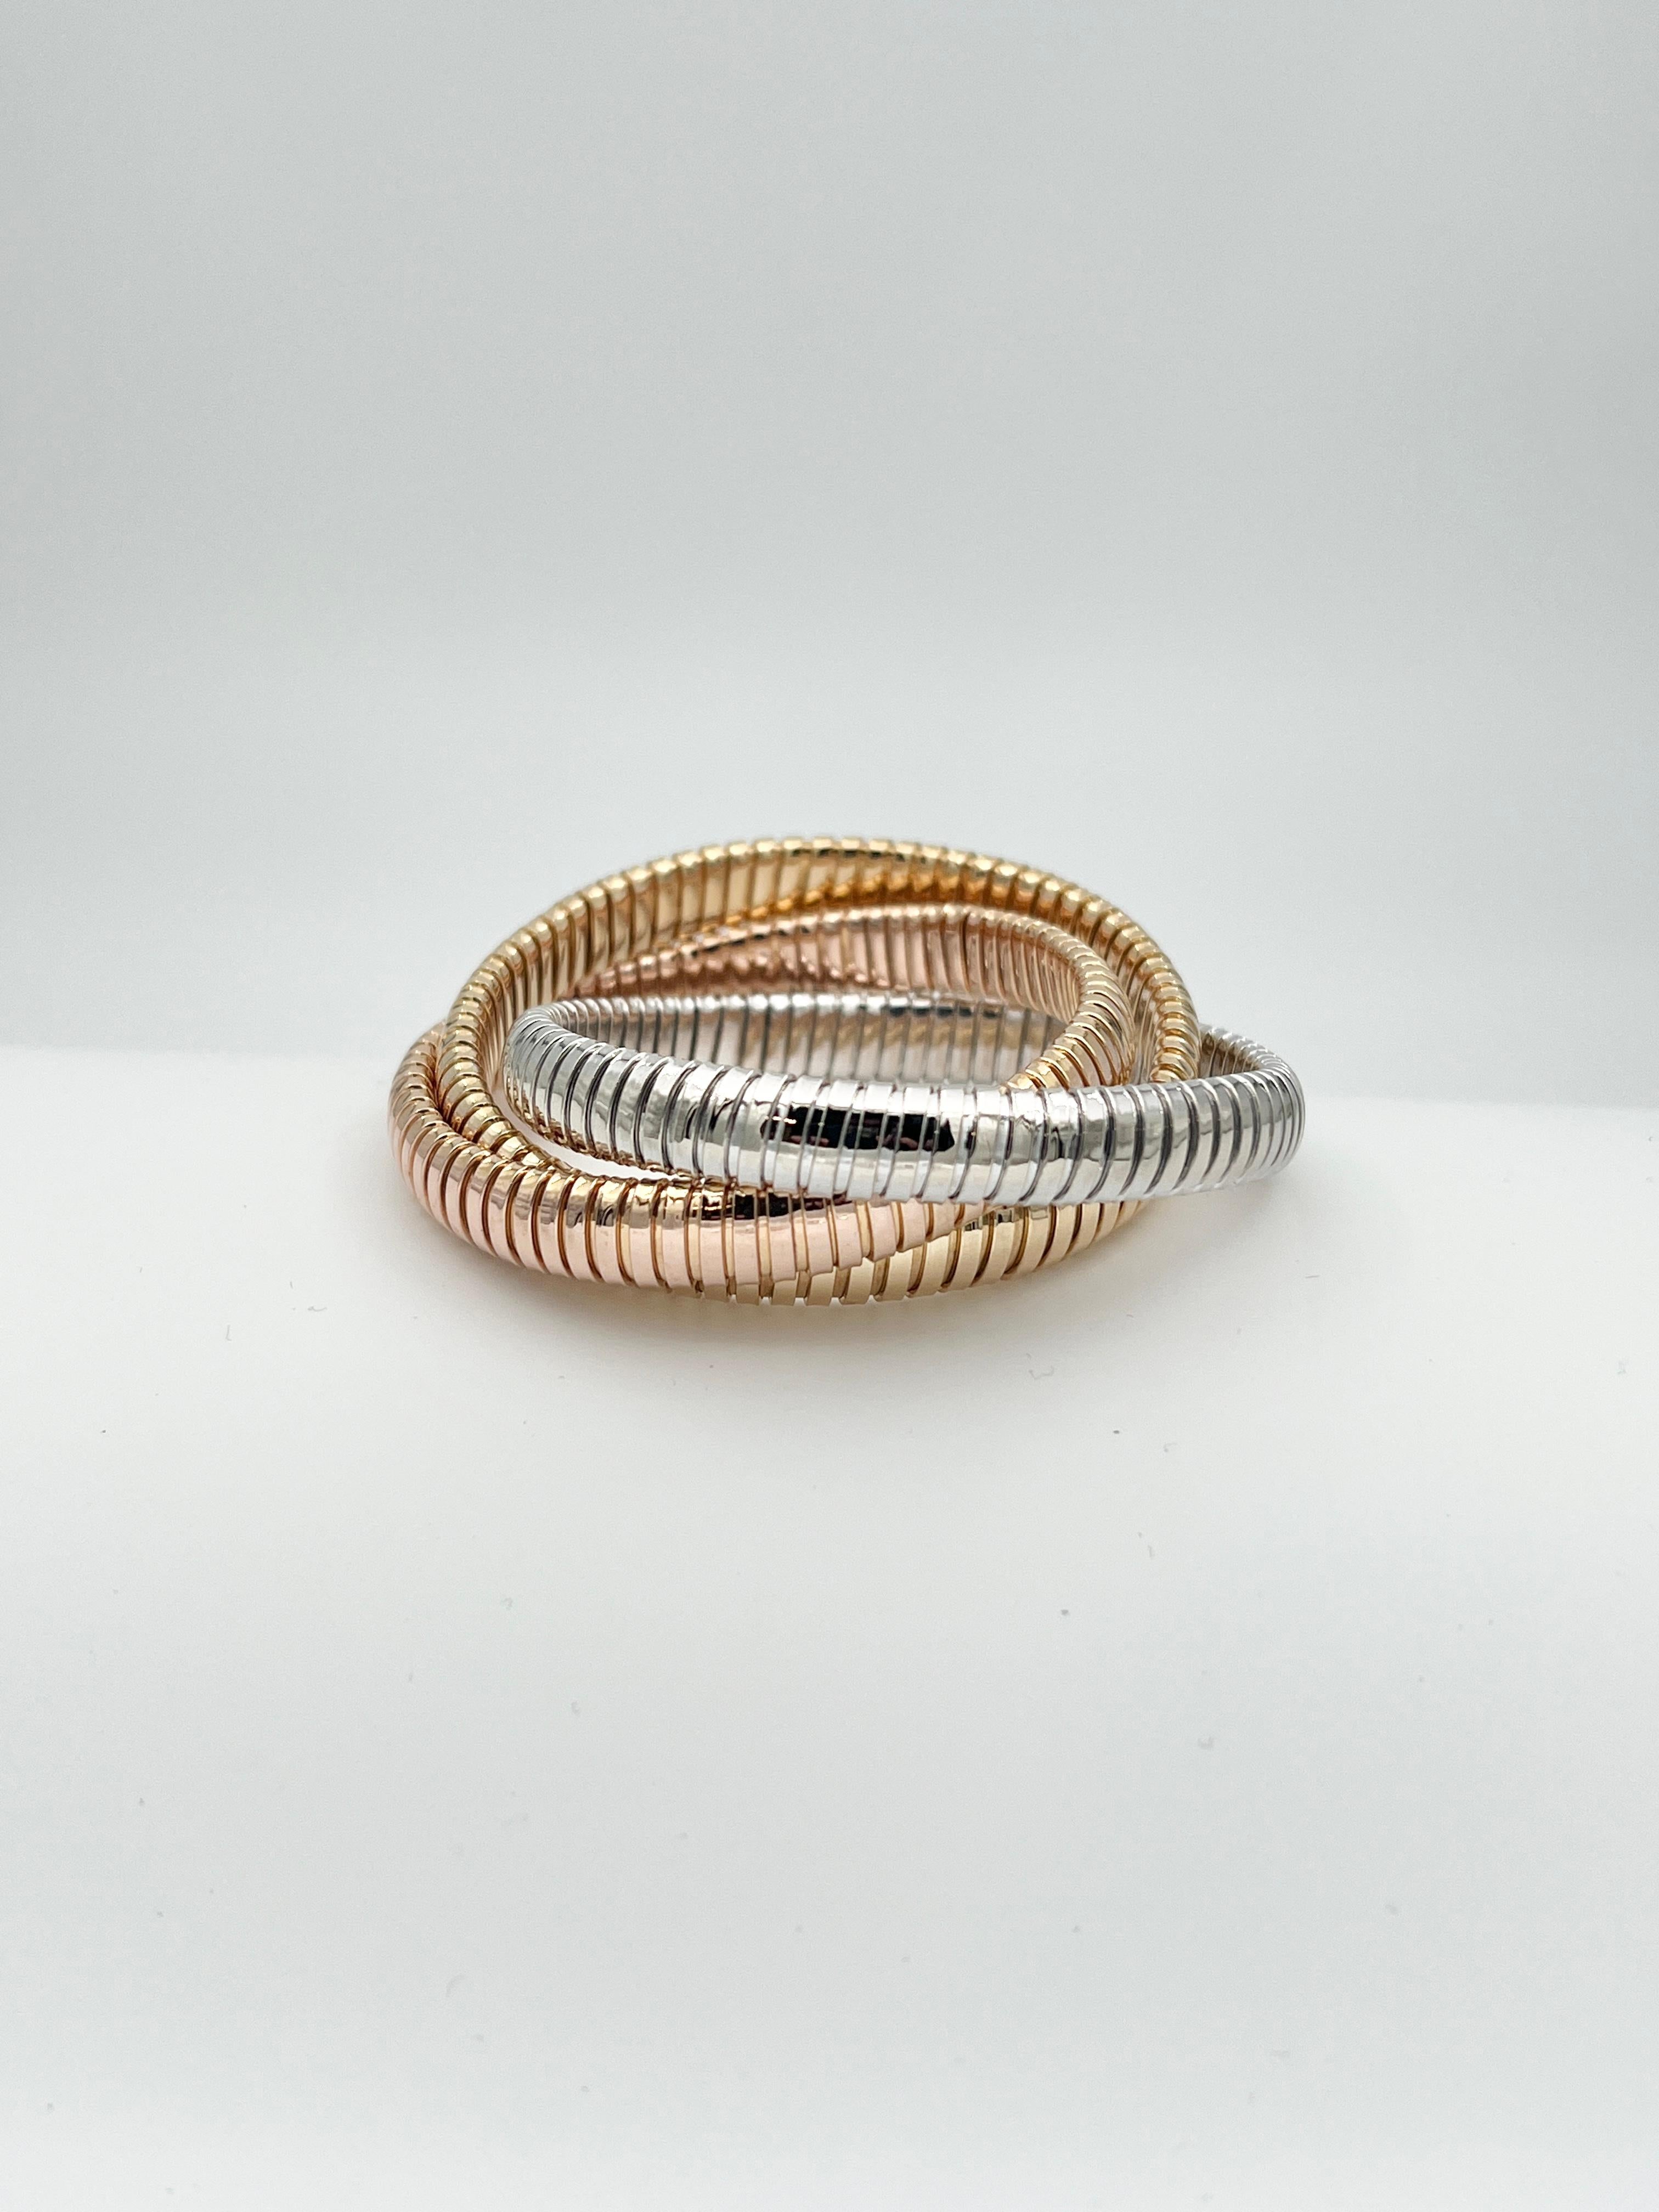 The Sidney Garber rolling gold bracelet is an exquisite piece of jewelry that exudes elegance and sophistication. Crafted from high-quality 18-karat gold, this bracelet features a unique rolling design that adds a touch of movement and texture to